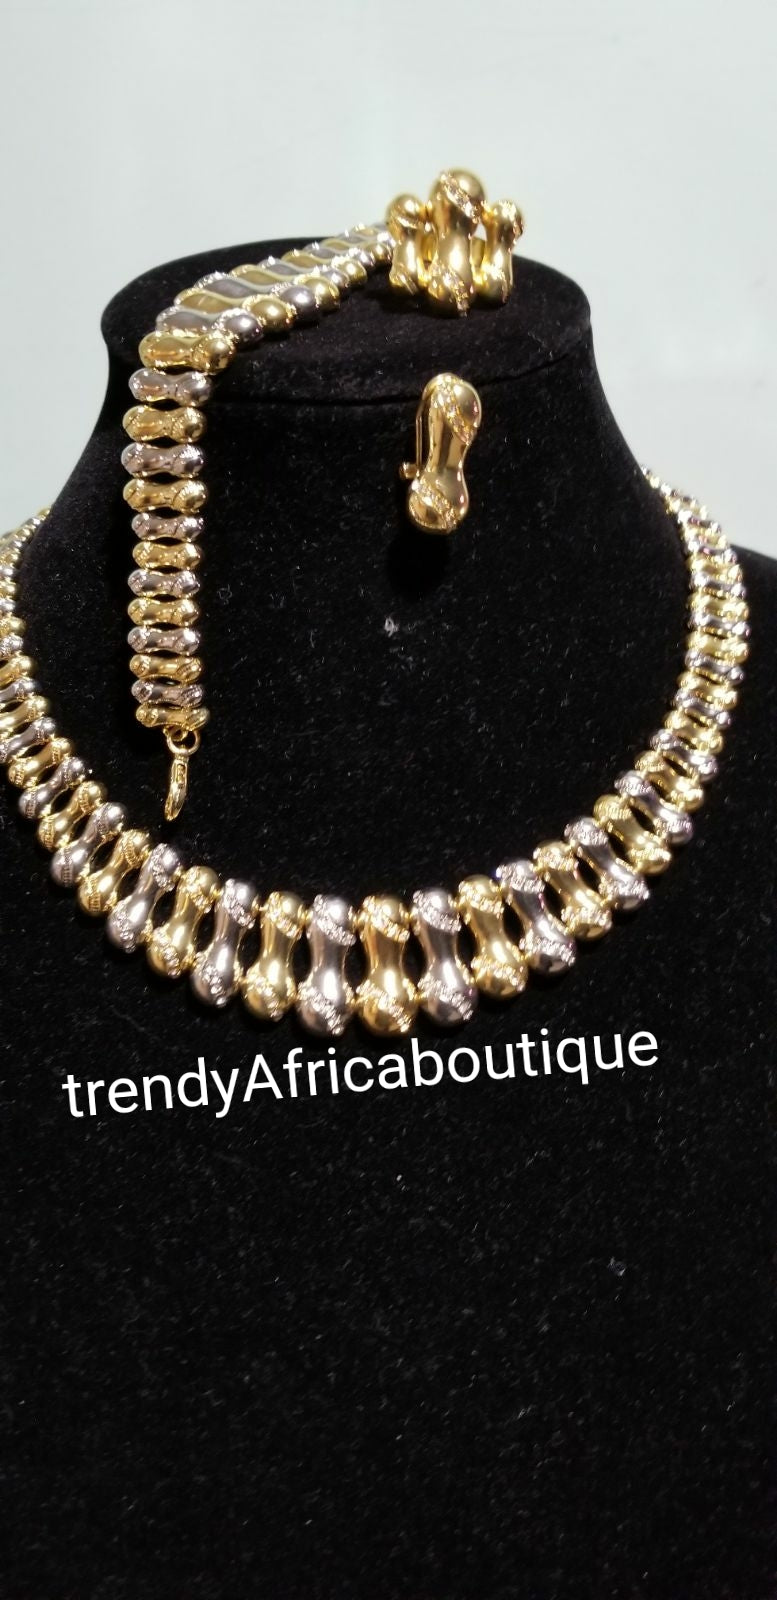 4pcs choker set. 2 tone ailver/gold set. 18k Gold/silver Costum necklace set. Sold as a set. Price is for the set